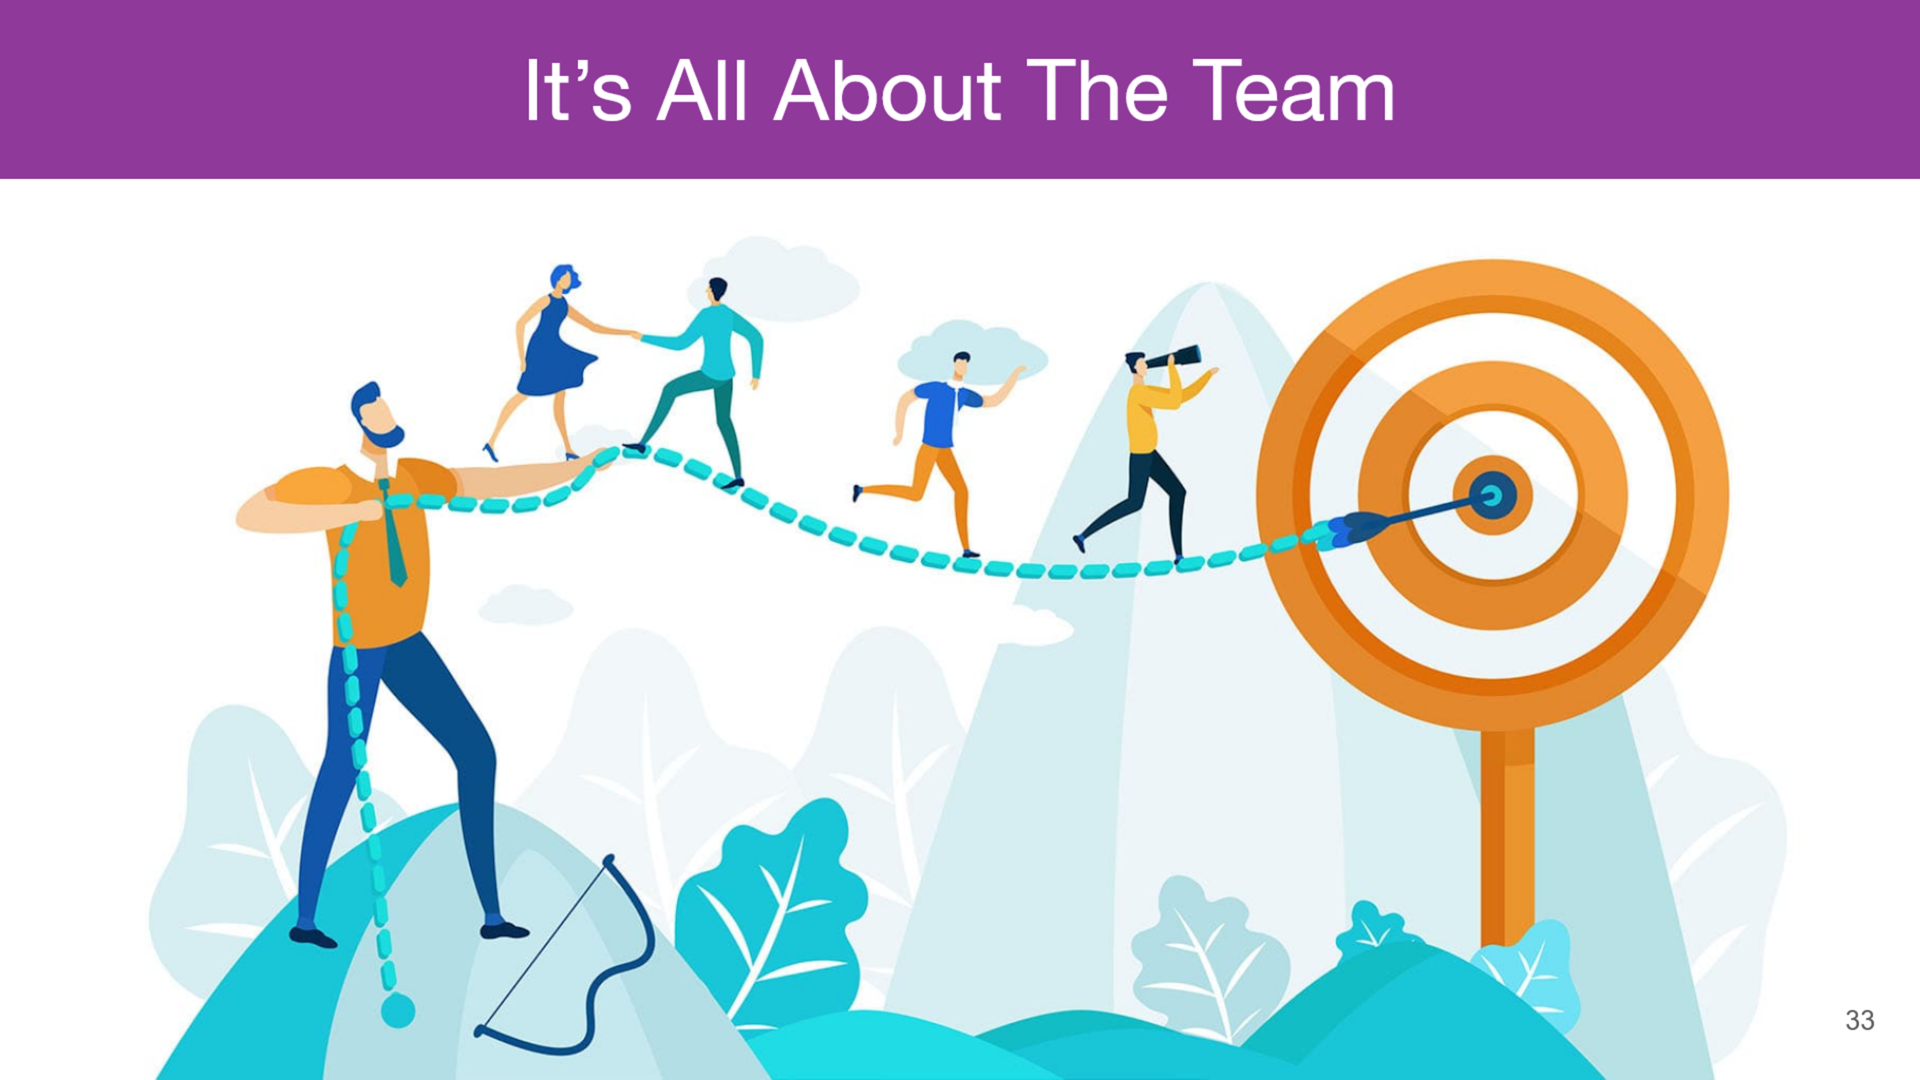 How To Be An Effective Tech Lead [Part 9] - It's All About The Team